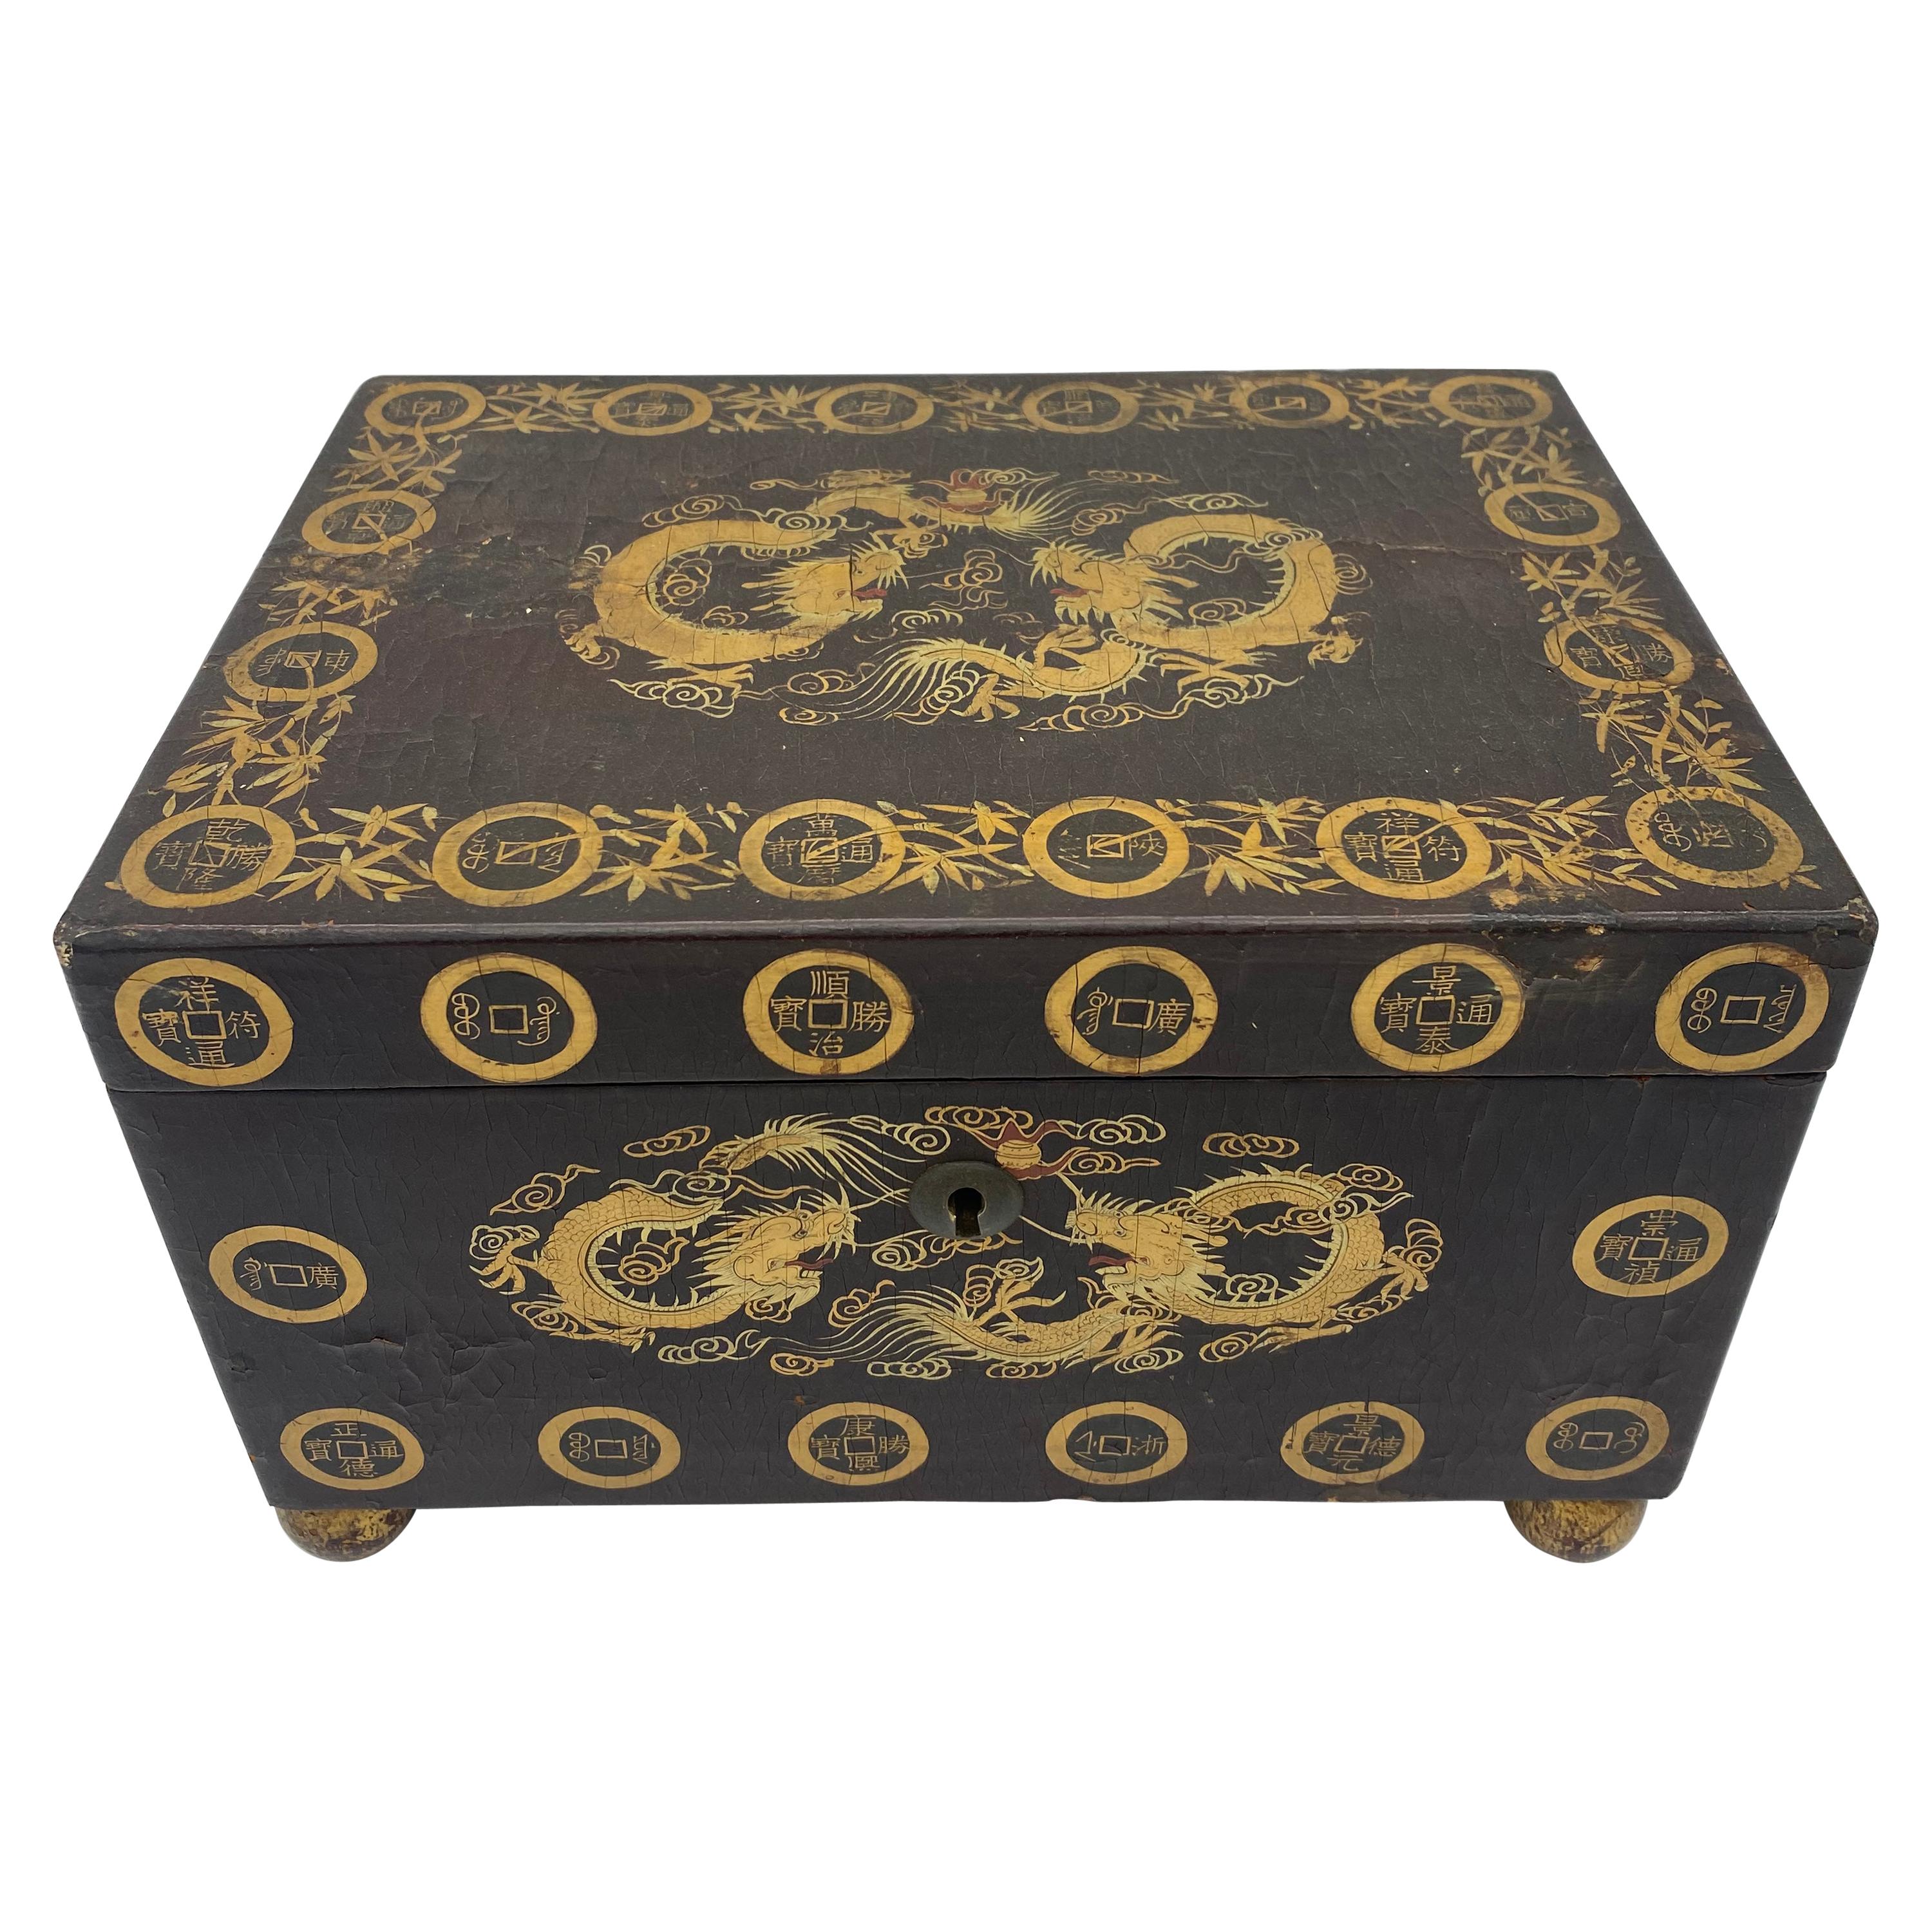 19th Century Gilt Chinese Lacquer Tea Caddy